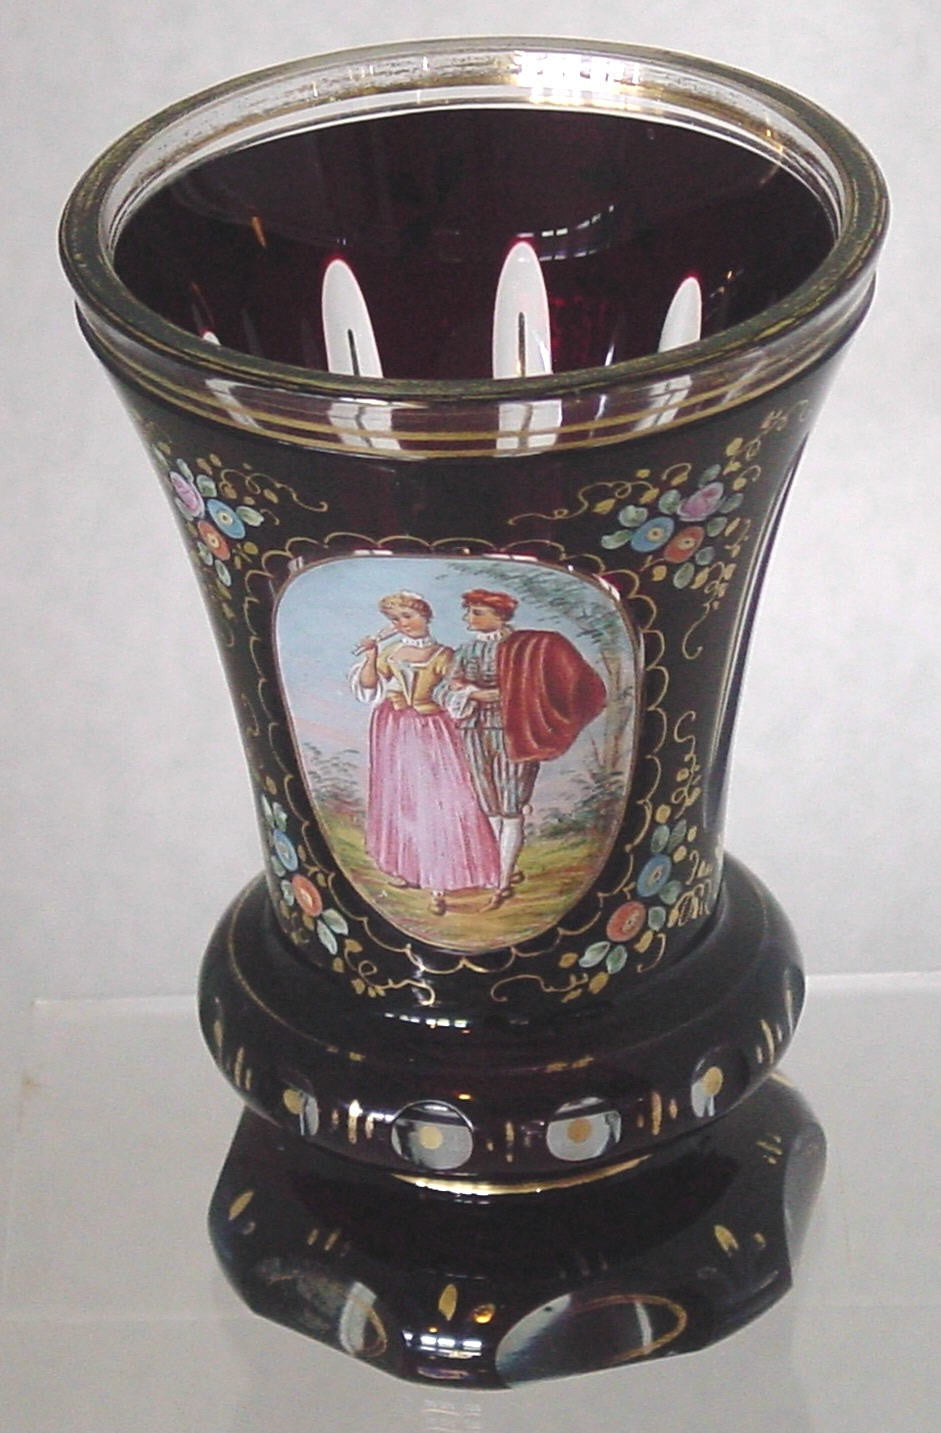 910079 Ruby Cased W/Cut Oval Panel Of Pntd Lady & Man, 7 Long Cuts, Bohemian Glassware, Antique, - ReeceFurniture.com - Free Local Pick Ups: Frankenmuth, MI, Indianapolis, IN, Chicago Ridge, IL, and Detroit, MI